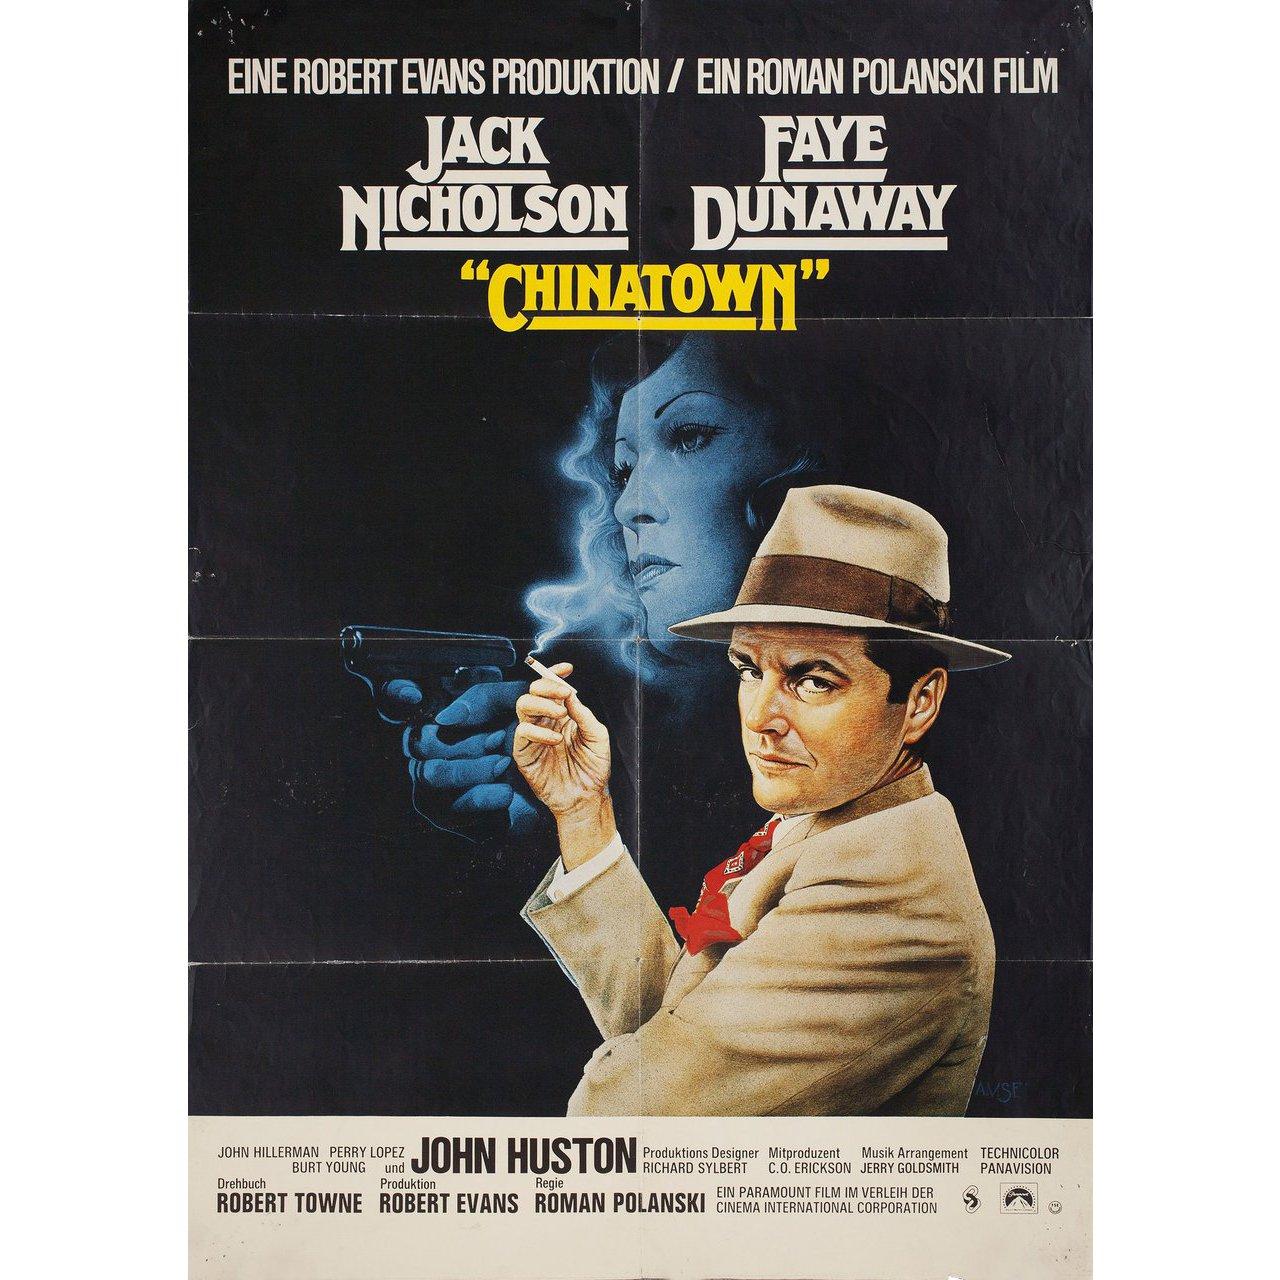 Original 1974 German A1 poster by Richard Amsel for the film 'Chinatown'directed by Roman Polanski with Jack Nicholson / Faye Dunaway / John Huston / Perry Lopez. Very good-fine condition, rolled. Please note: the size is stated in inches and the